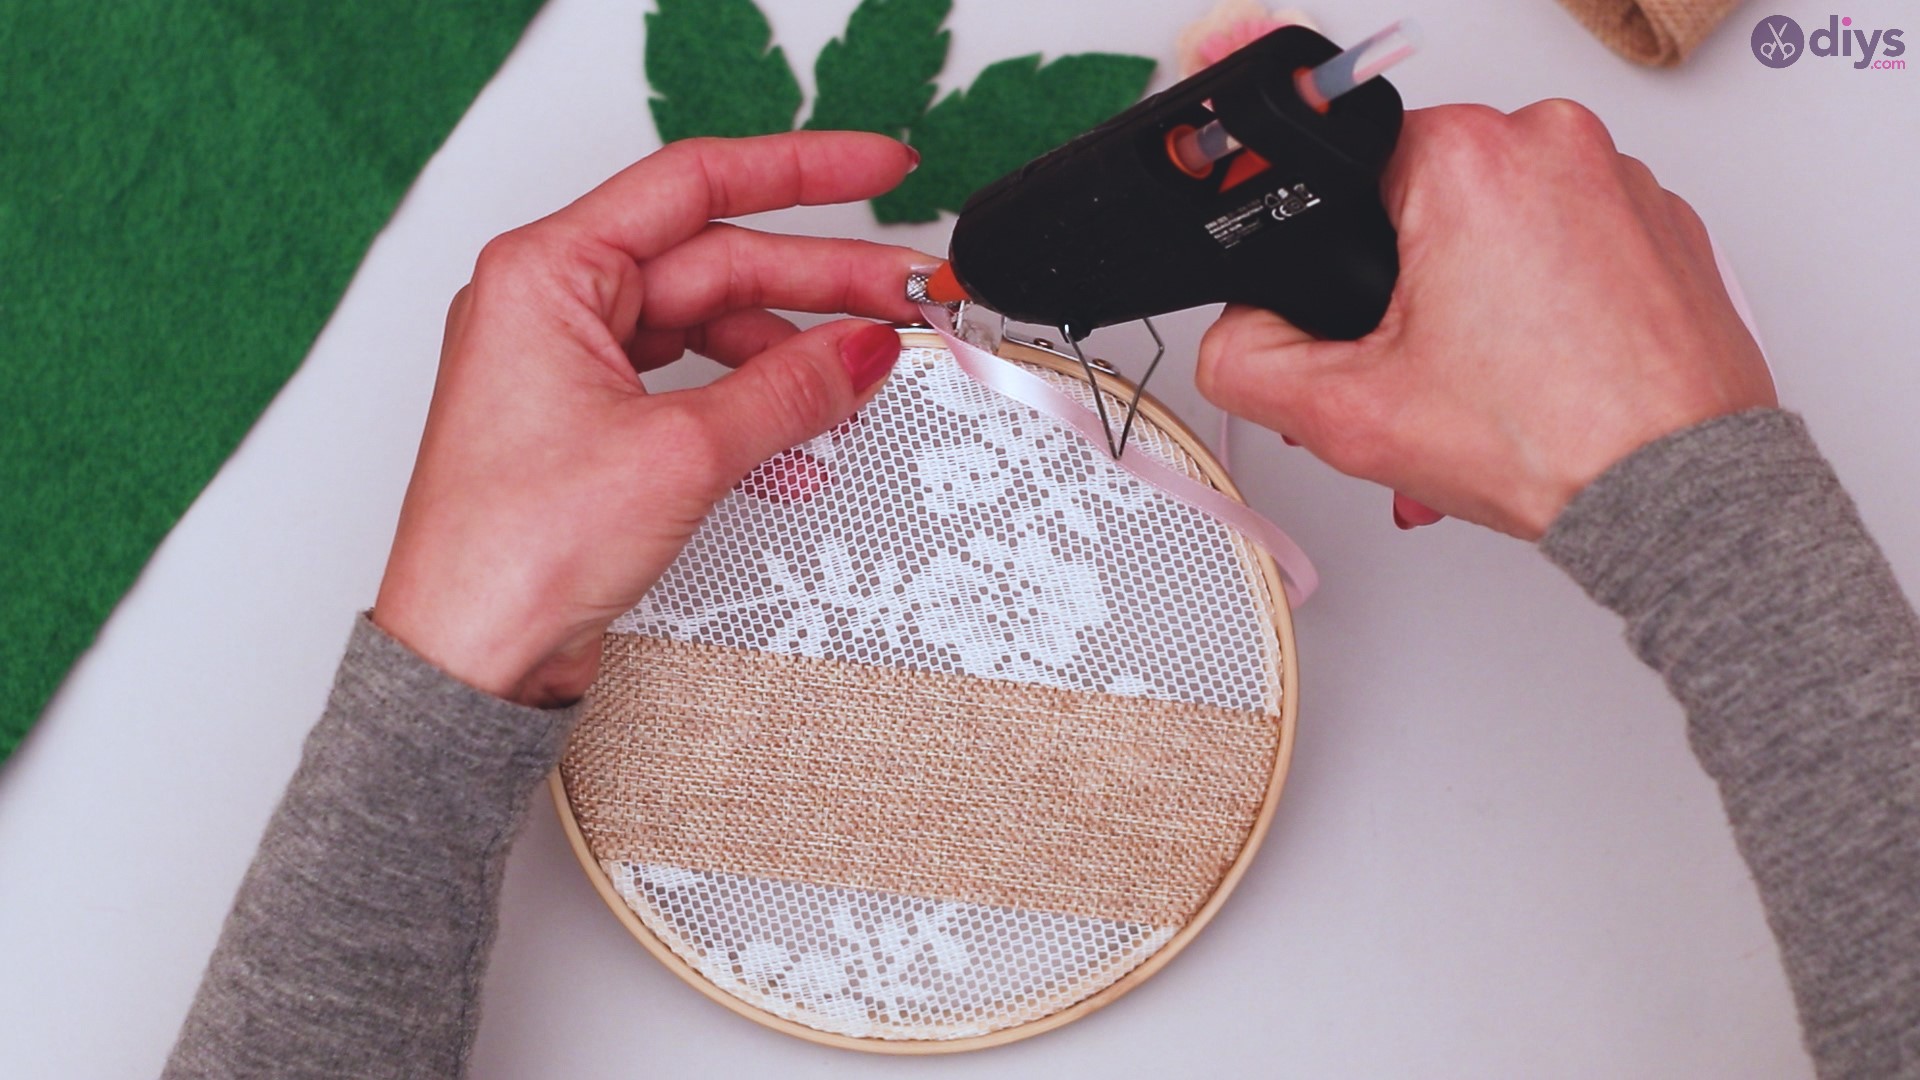 Diy embroidery hoop wall decor tutorial step by step (53)